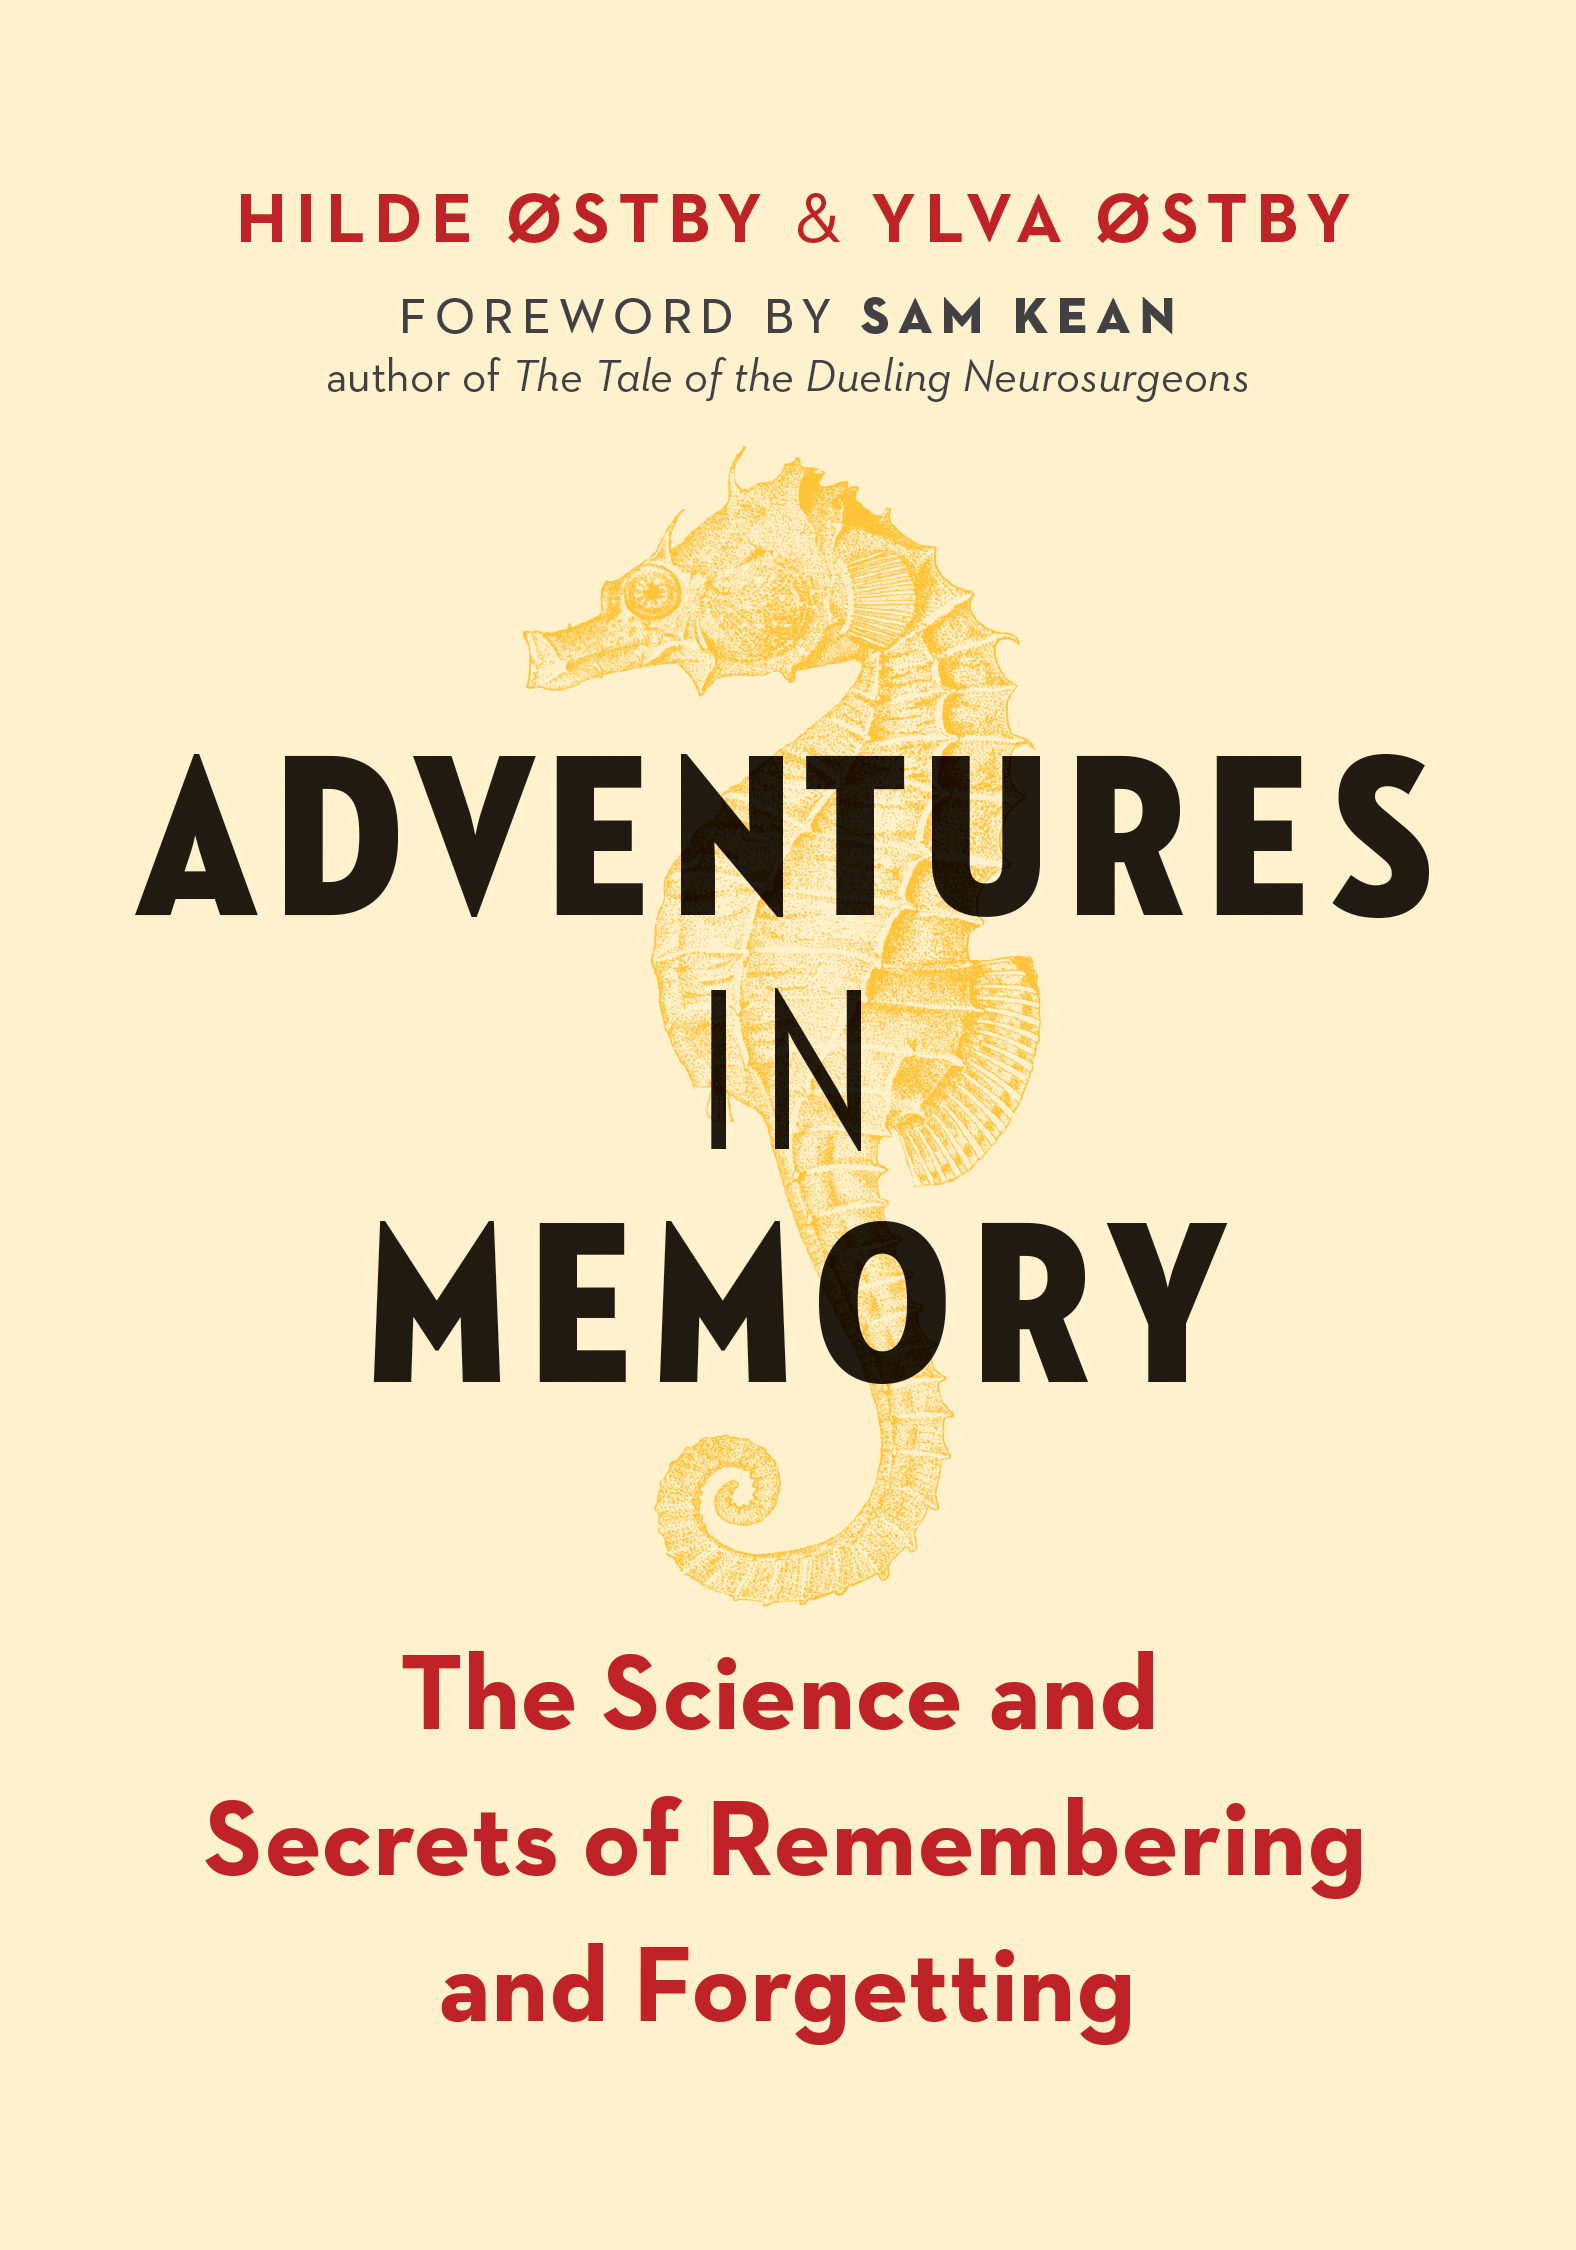 Adventures in Memory : The Science and Secrets of Remembering and Forgetting | Psychology & Self-Improvement